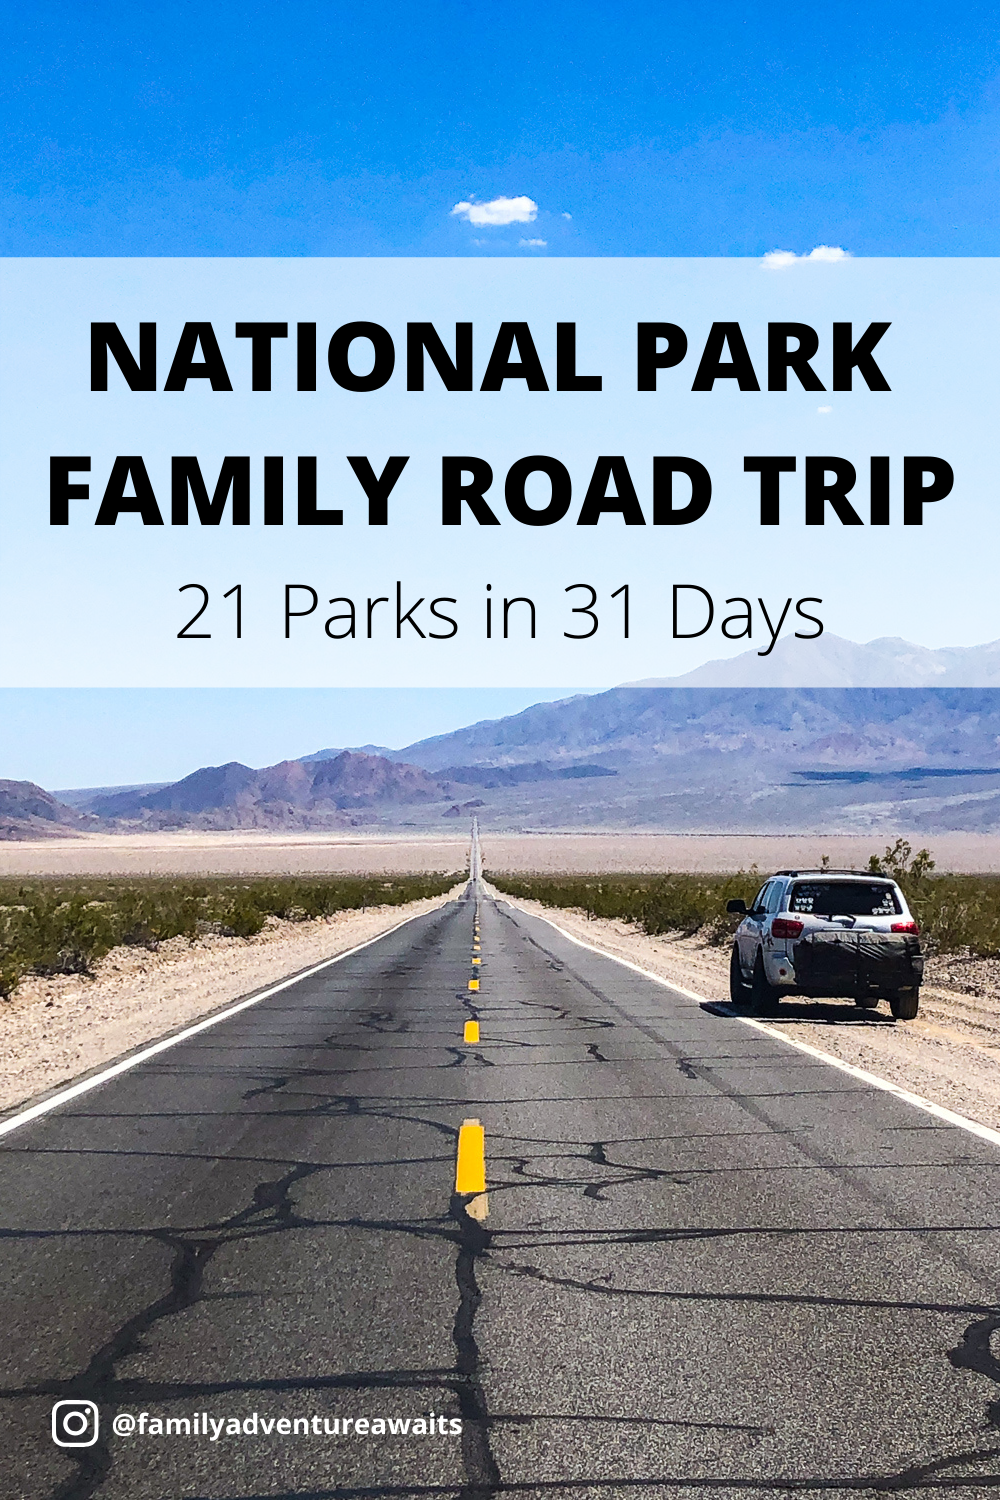 National park family road trip